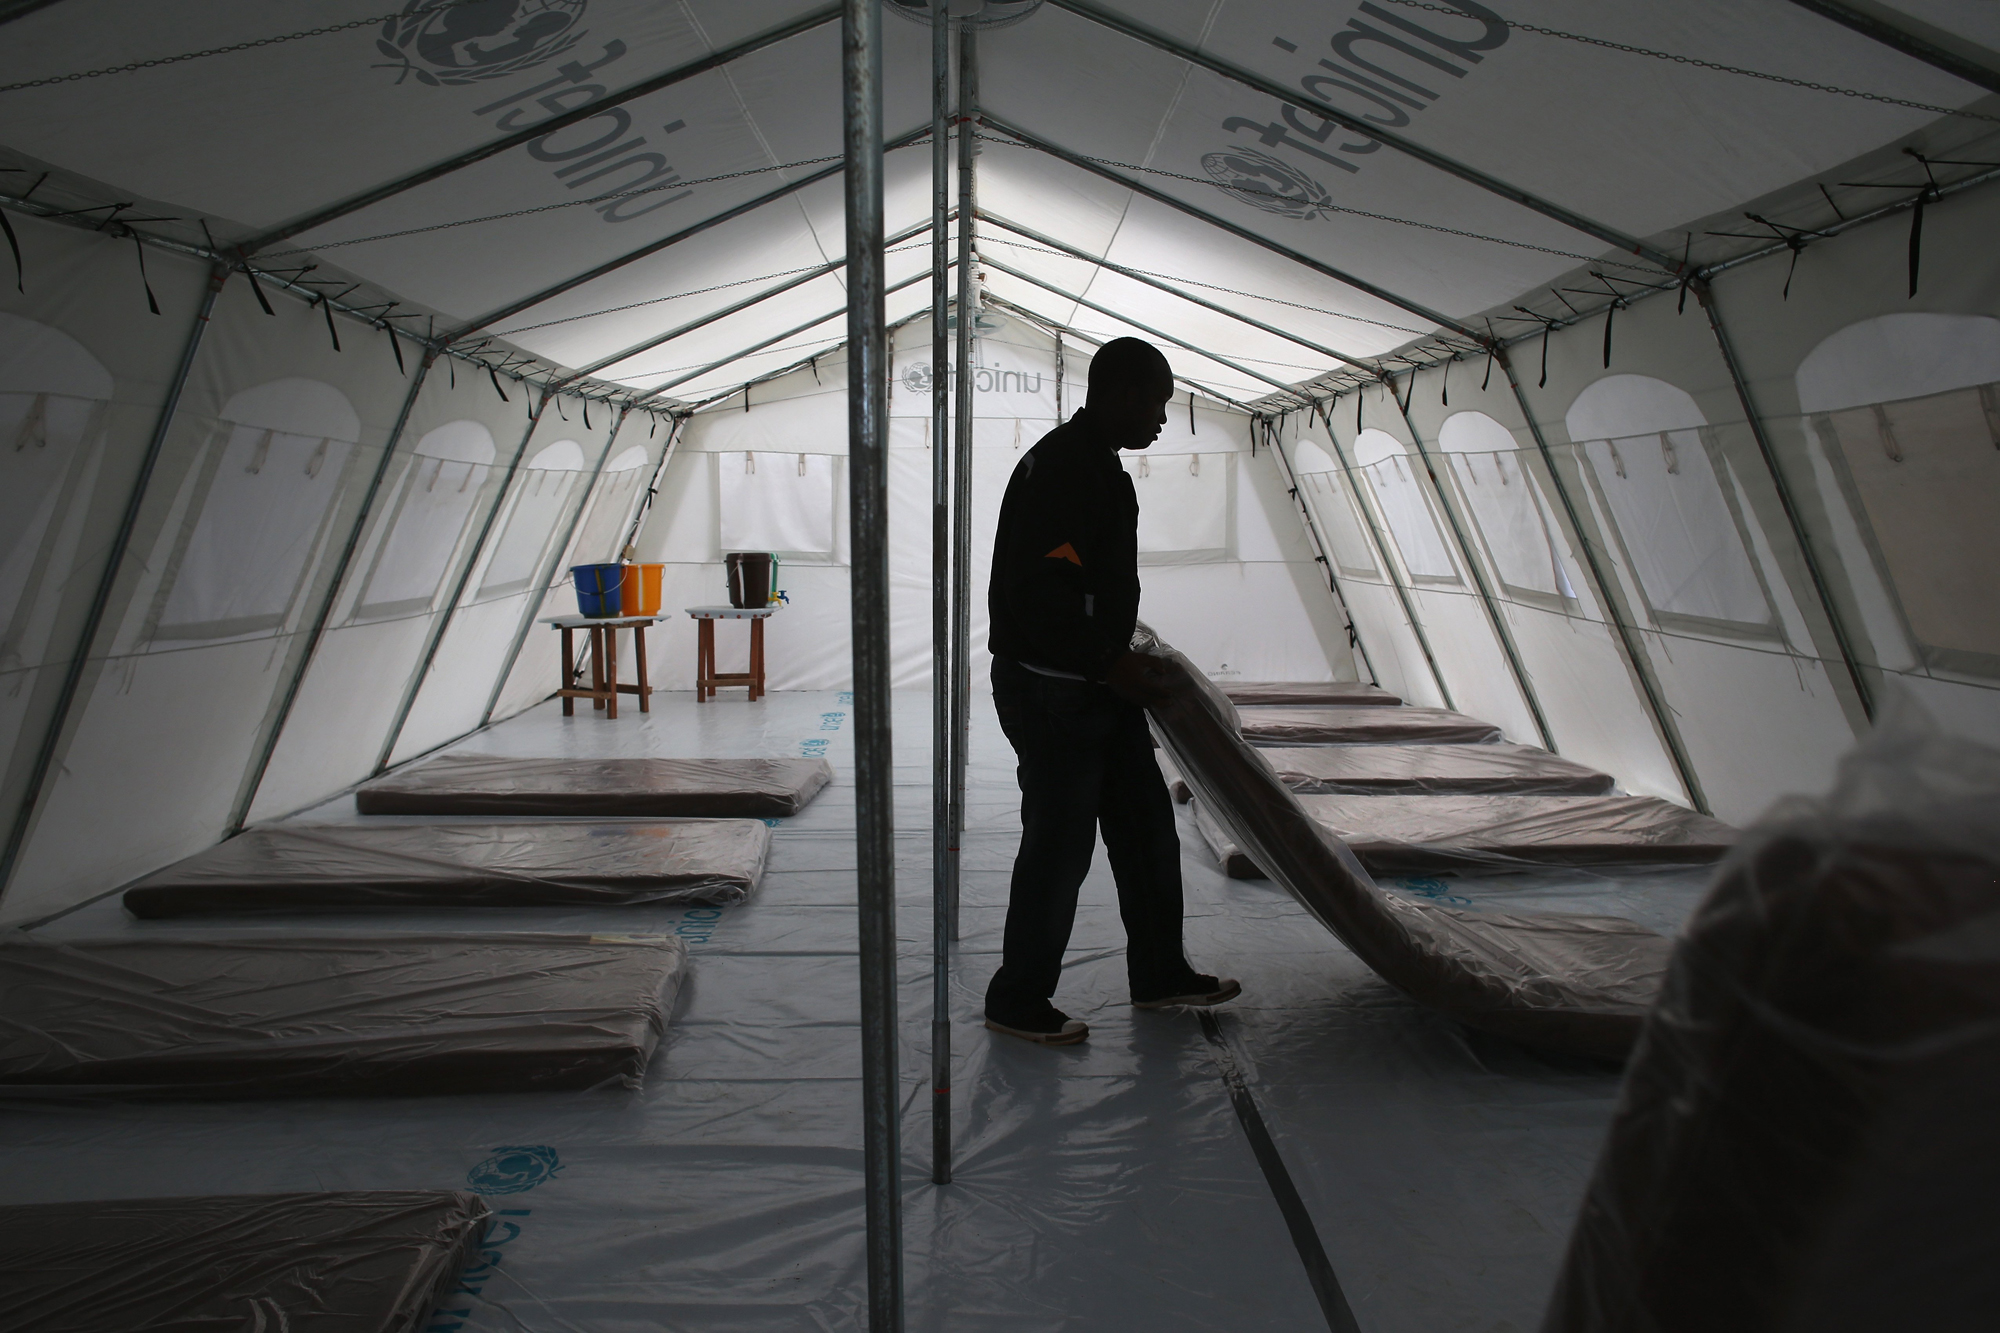 Workers prepare the new Doctors Without Borders (MSF), Ebola treatment center on Aug. 17, 2014 near Monrovia, Liberia. Tents at the center were provided by UNICEF.